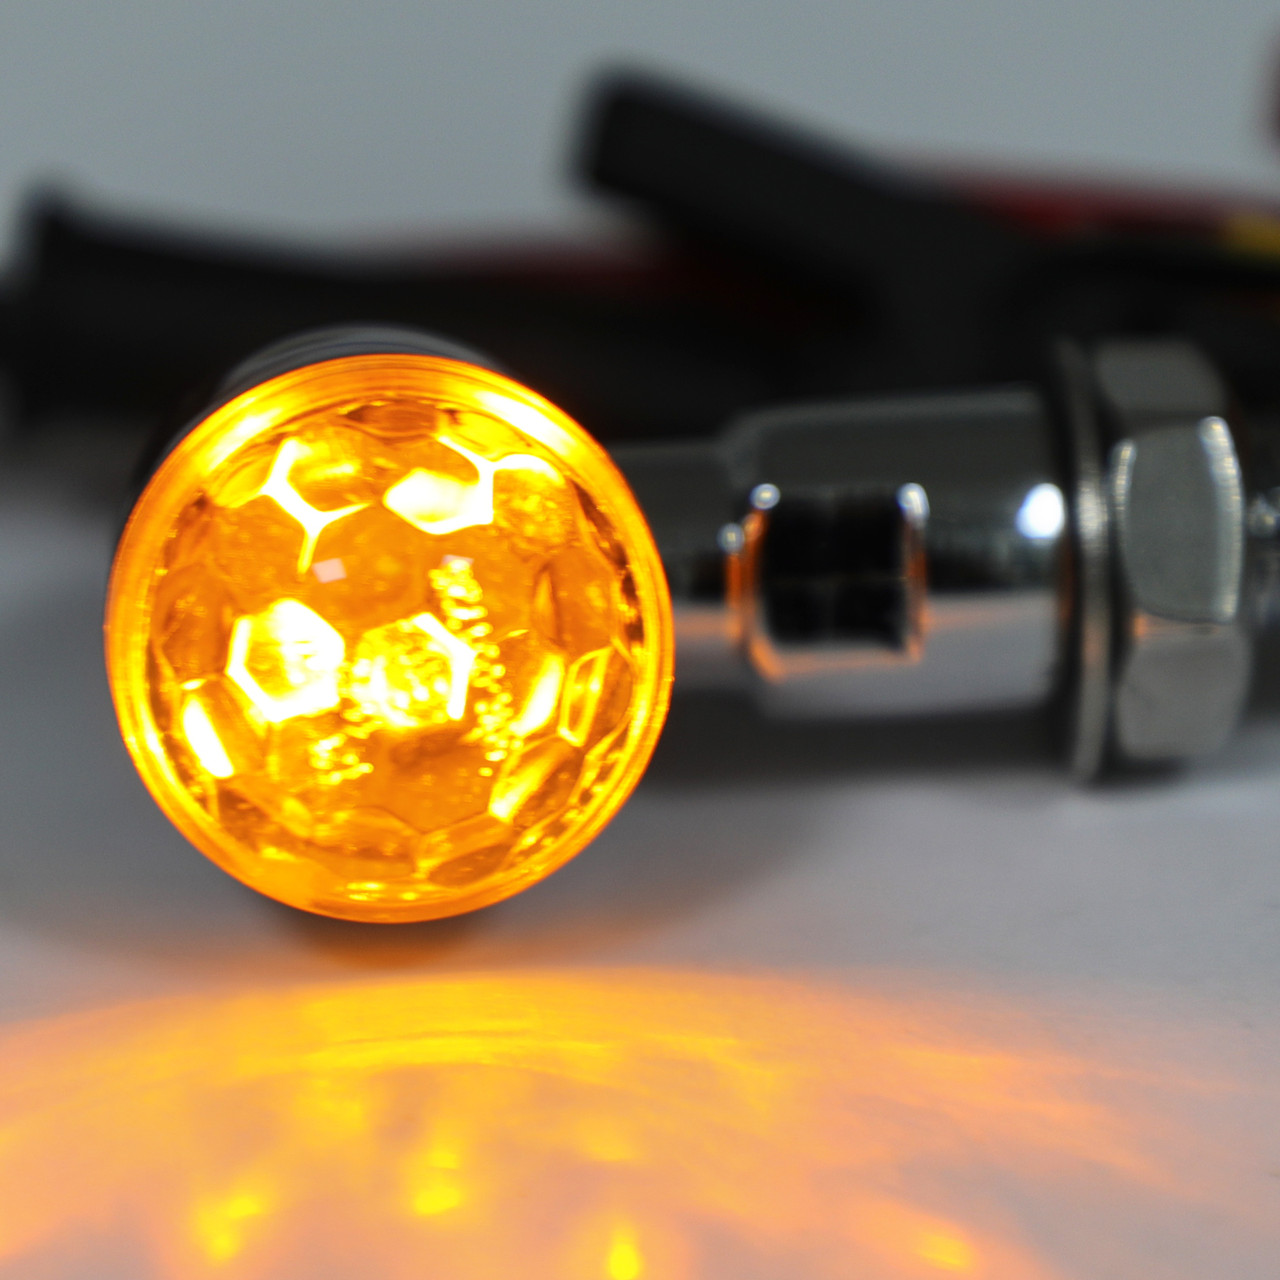 Mini Bullet turn signal light Fit for Suzuki with 8mm Hole Fairing ChromeS~BC3